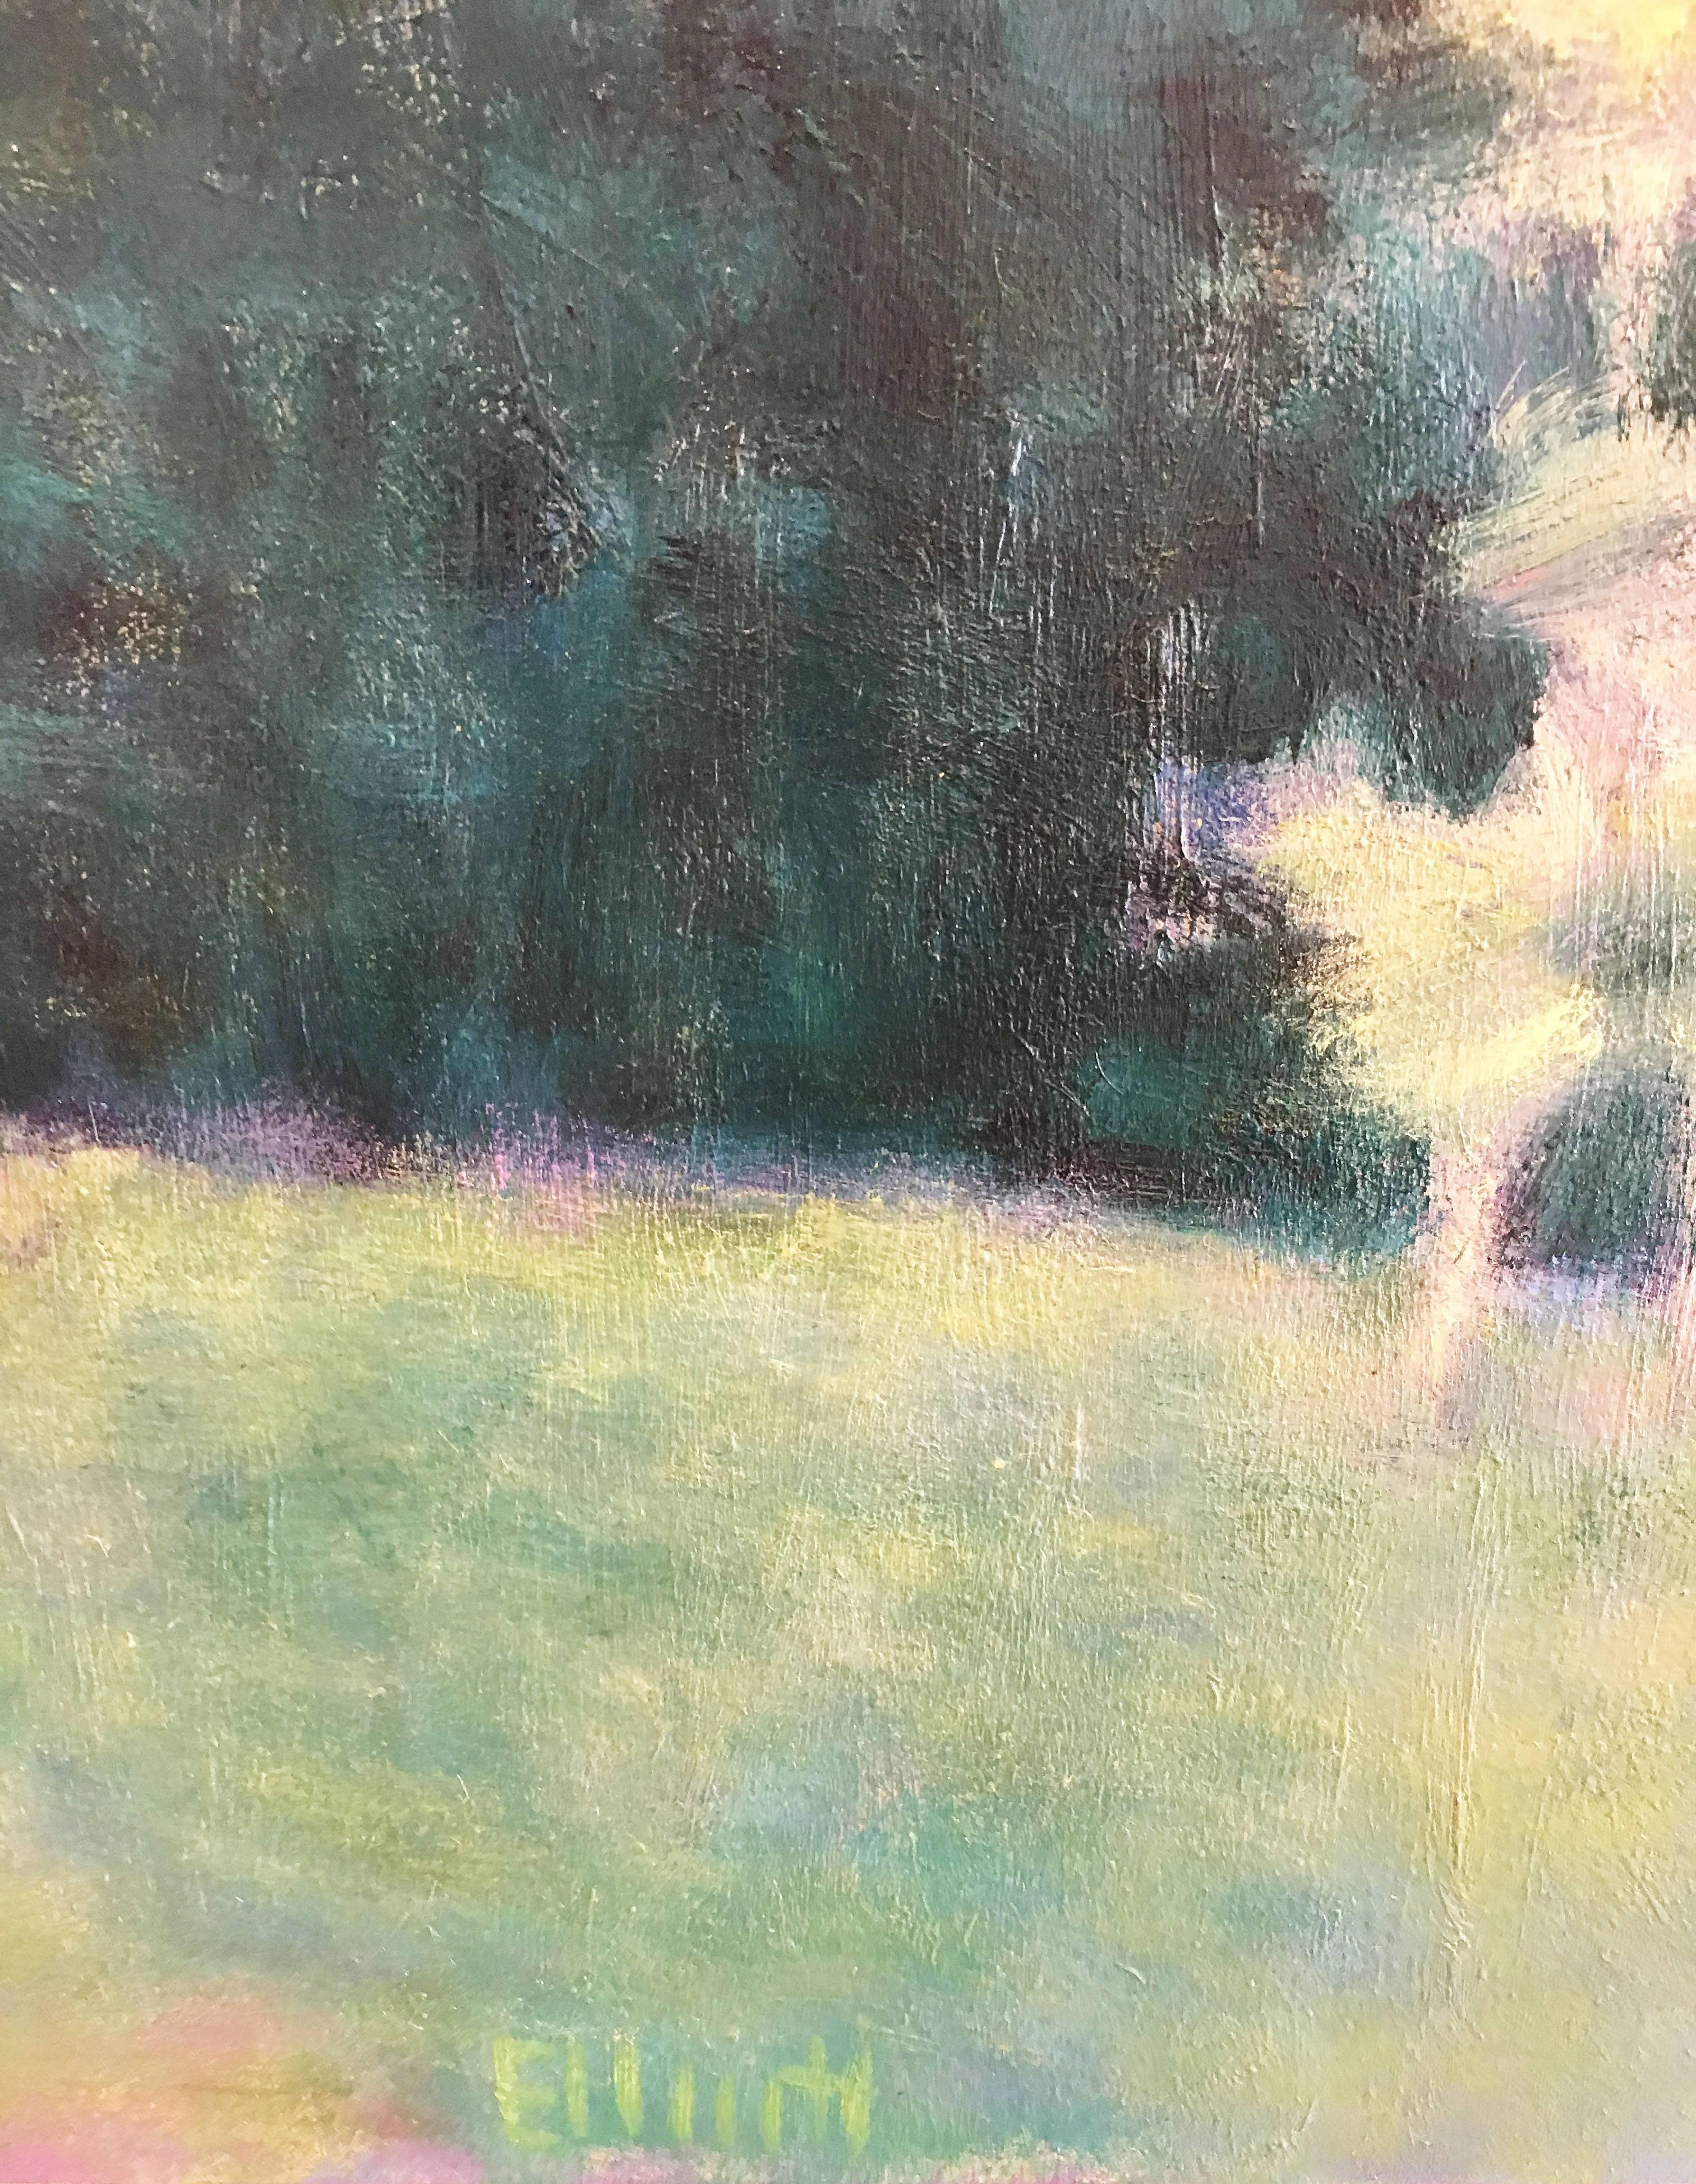 'Green Dream' 2017 by American artist, Ken Elliott. Oil on panel, 24 x 24 in.  A serene and peaceful view of a meadow and woodland. Painted in an Impressionist style, the rich colors of varying hues of green blend beautifully with the hints of pink